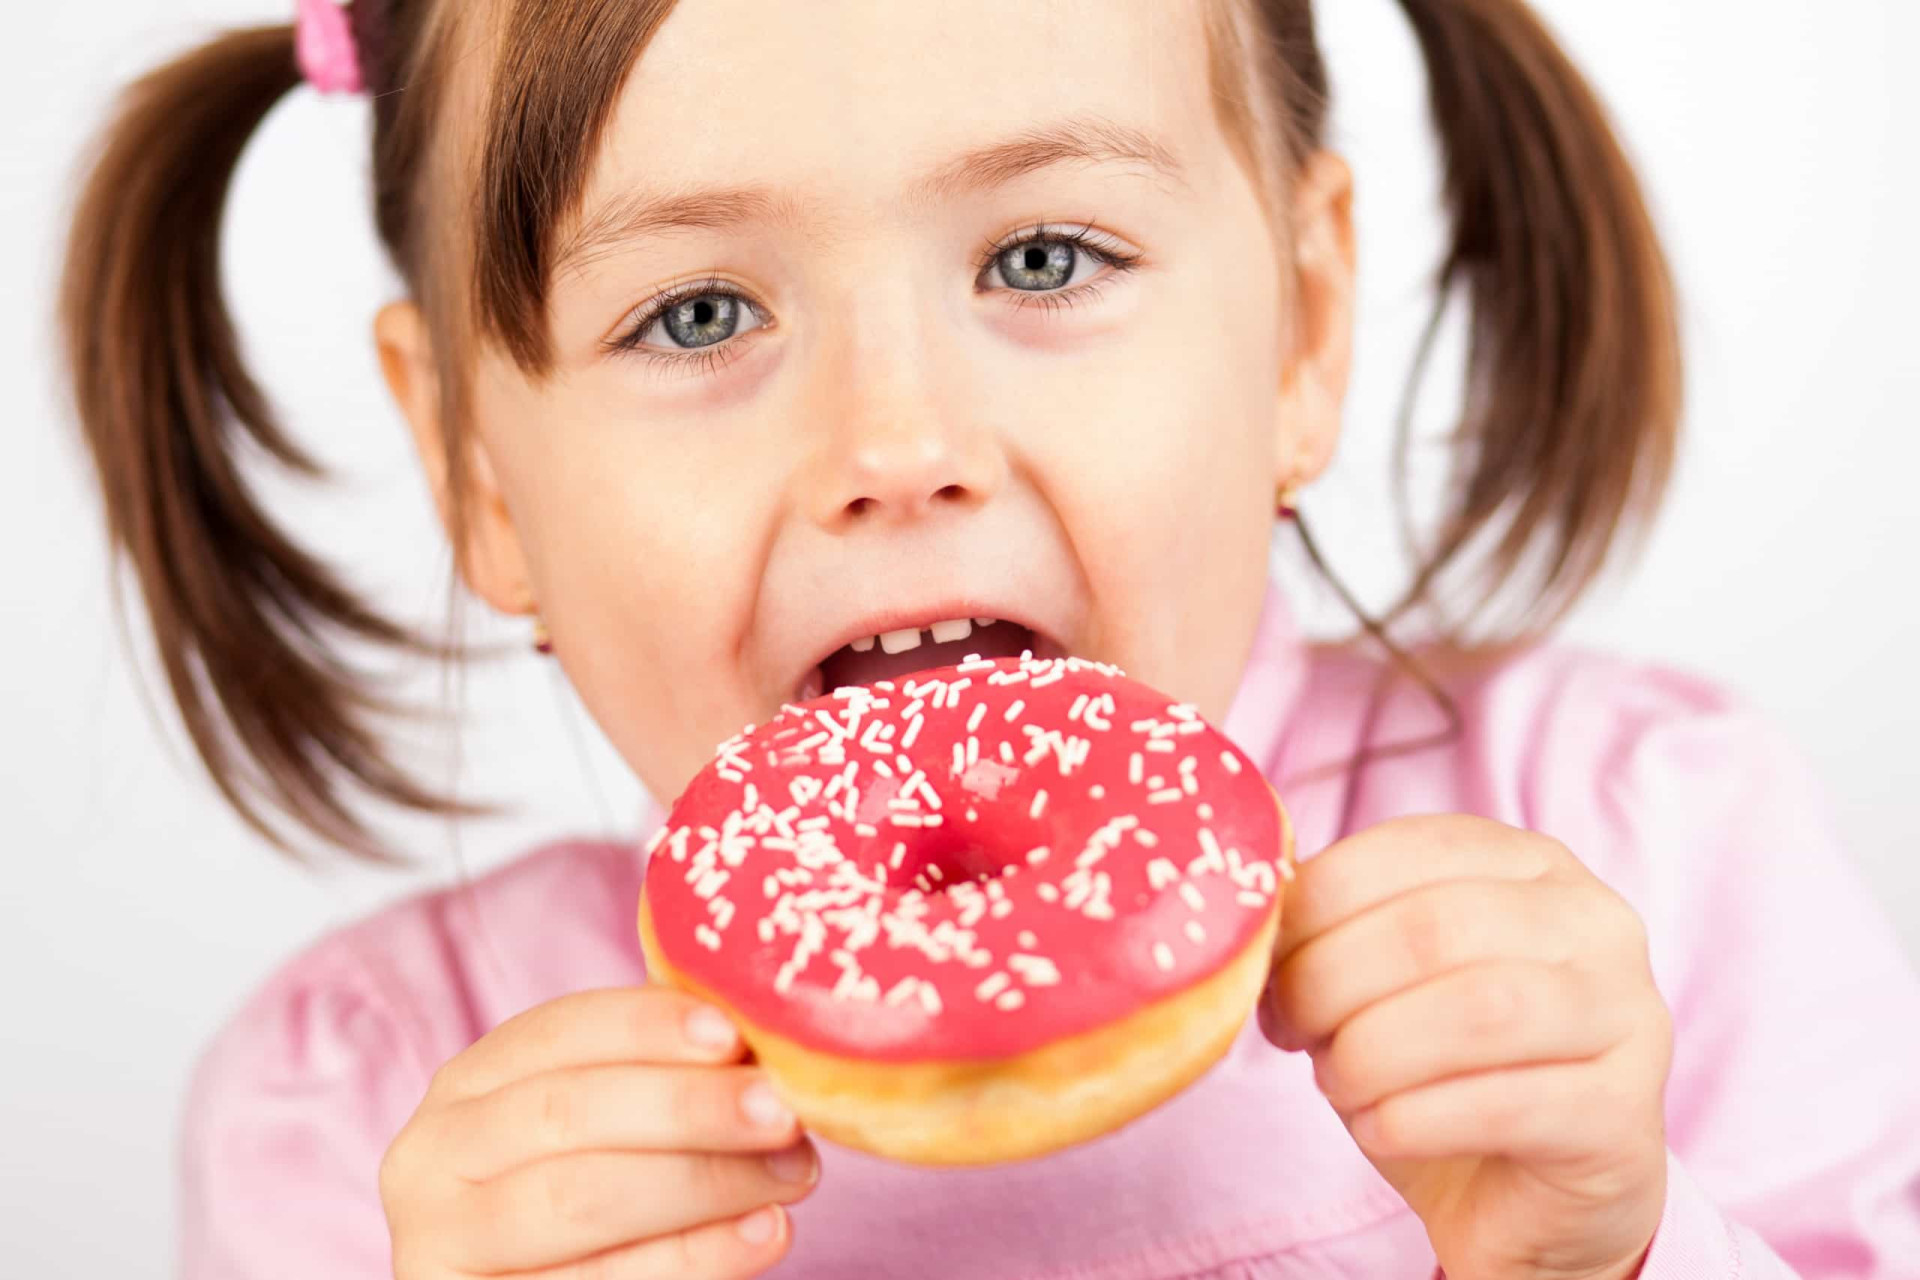 <p>Children of permissive parents also risk developing physical health issues like obesity and dental hygiene problems because they can lack the discipline to limit their junk food intake.</p>